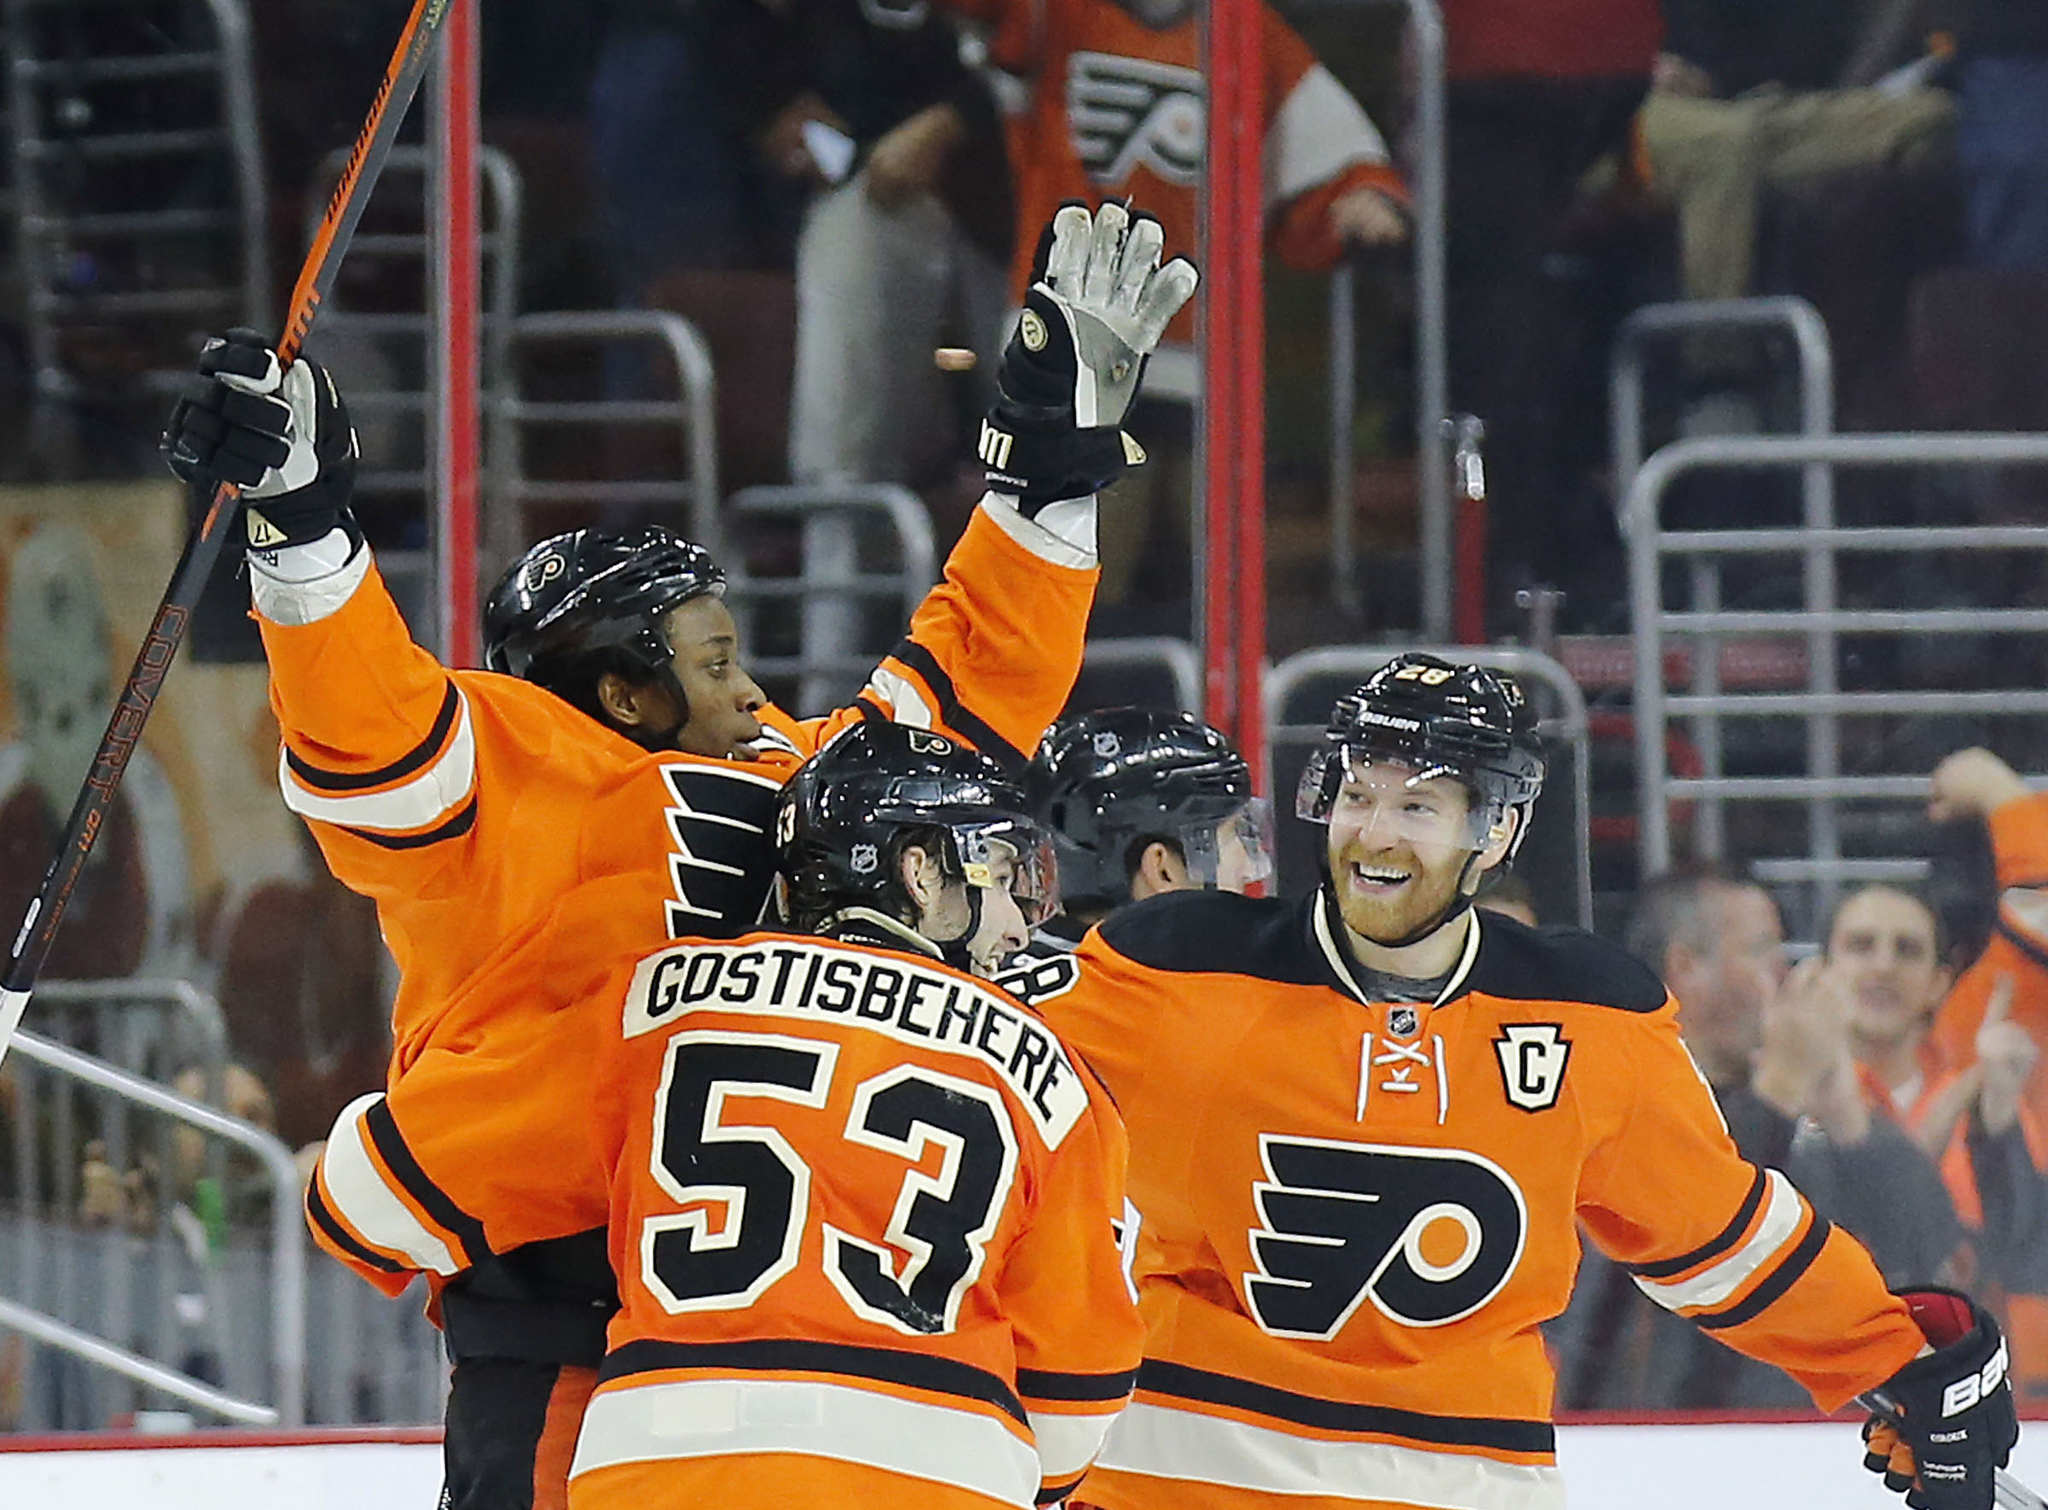 Report: Flyers sign Wayne Simmonds to six-year extension - NBC Sports